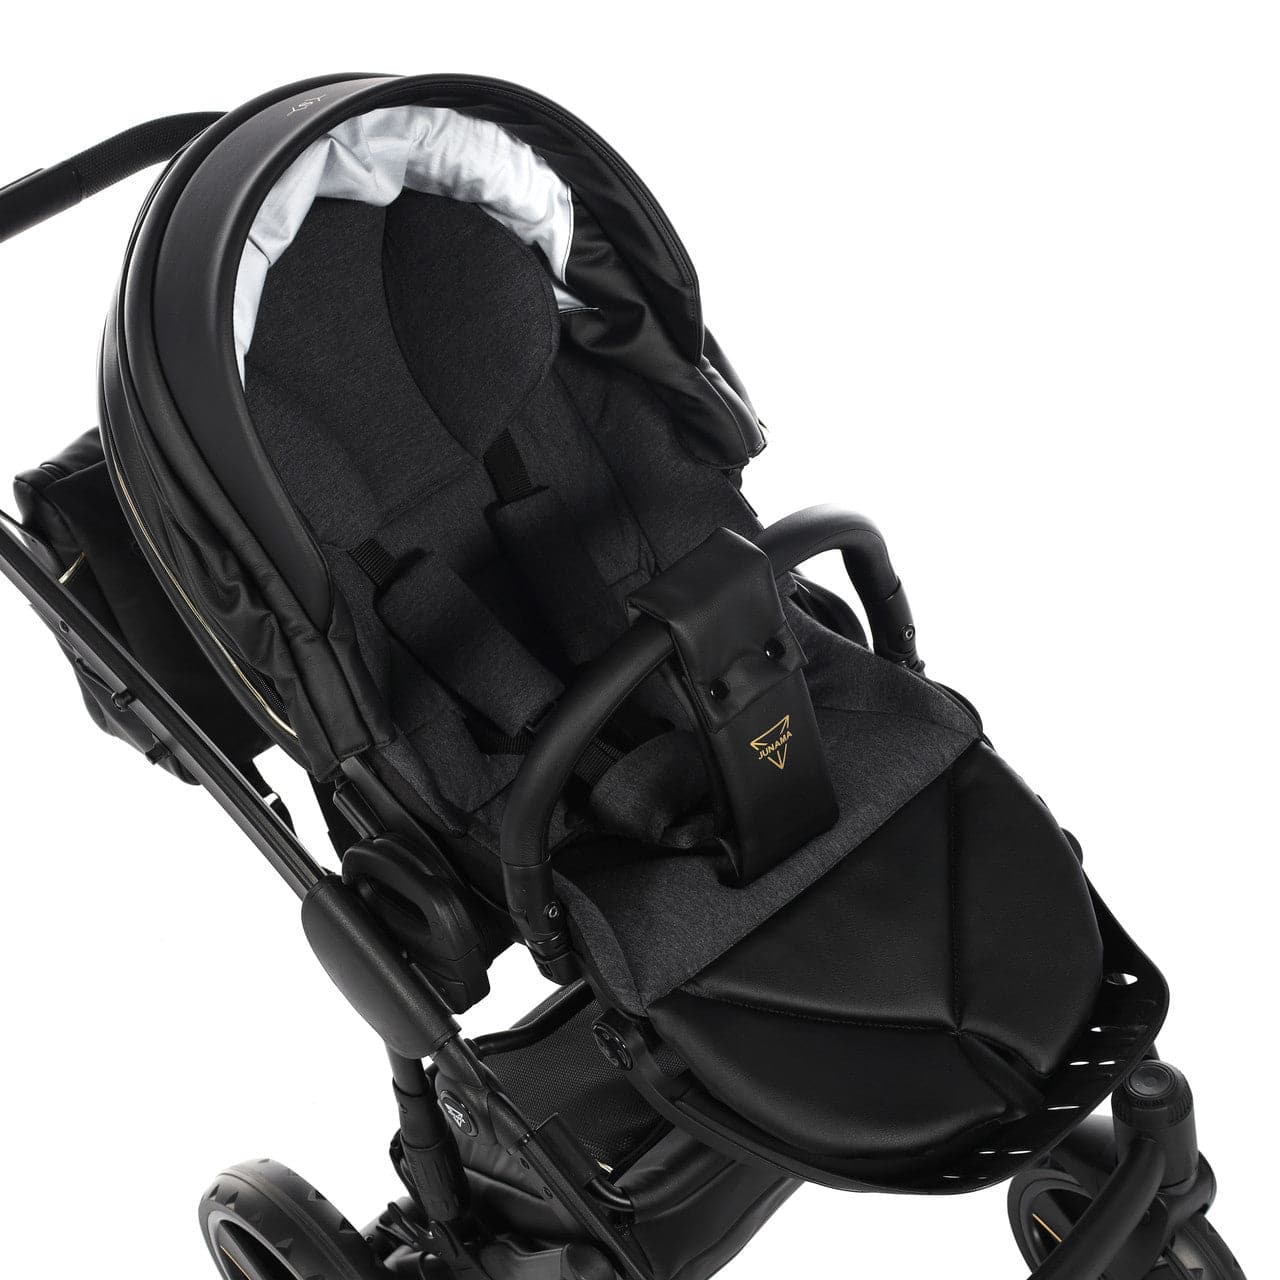 Junama S-Class 2 In 1 Pram - Black -  | For Your Little One